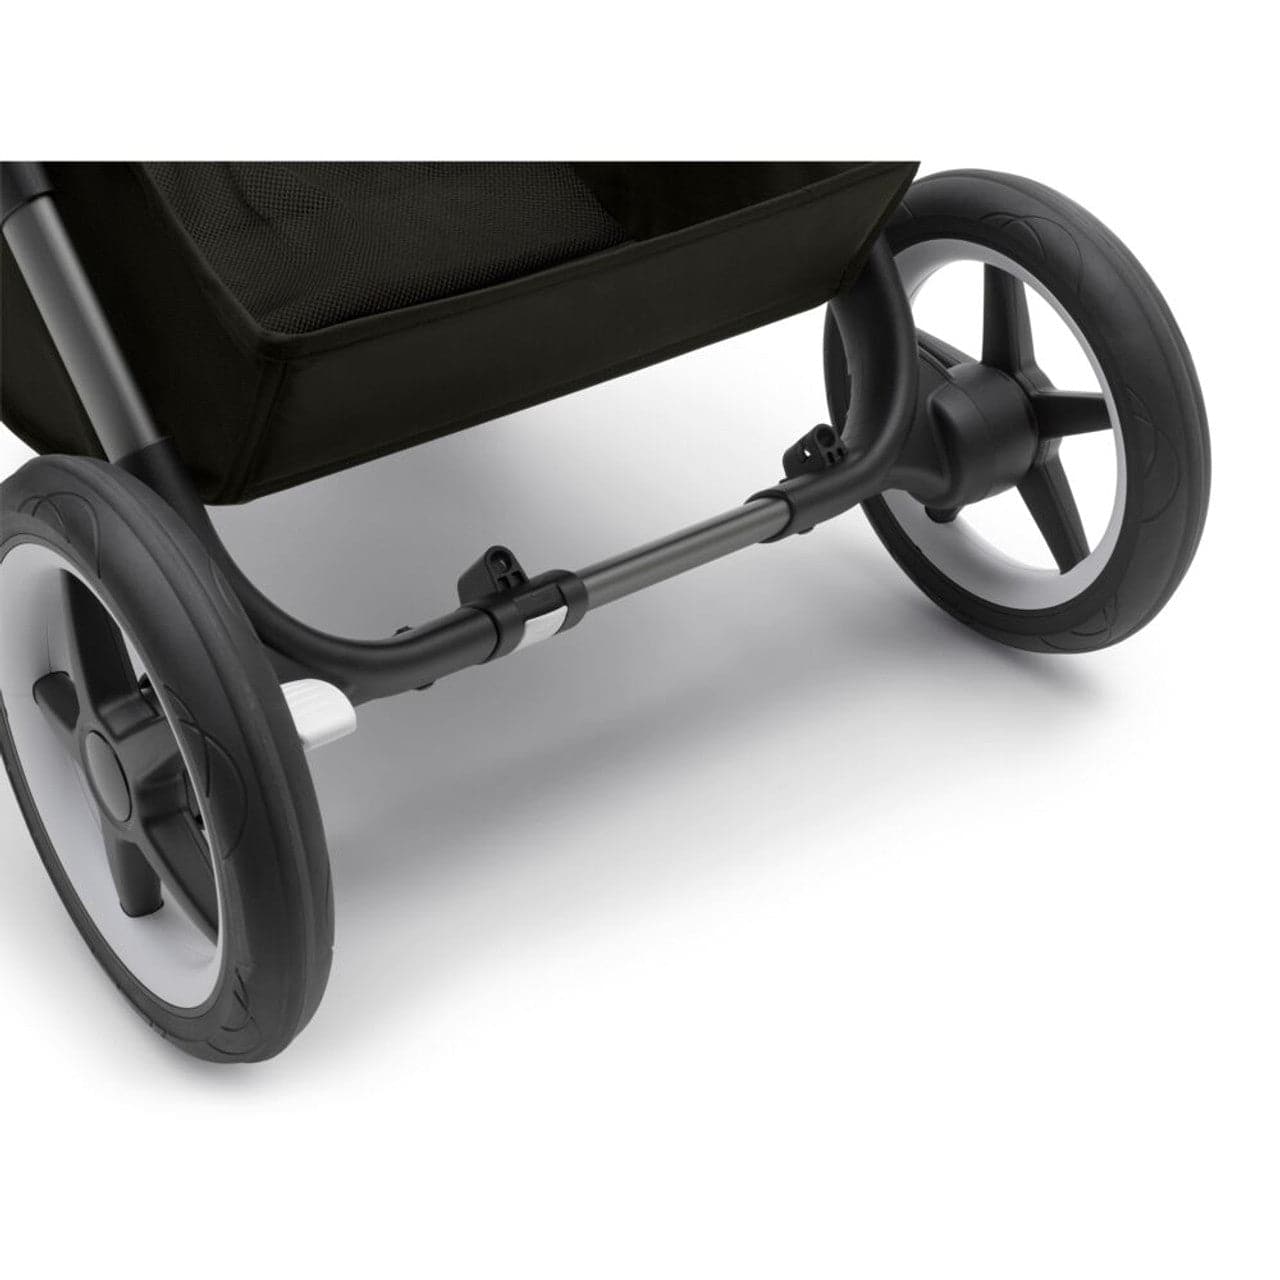 Bugaboo Donkey 5 Twin Pushchair on Graphite/Grey Chassis - Choose Your Colour -  | For Your Little One